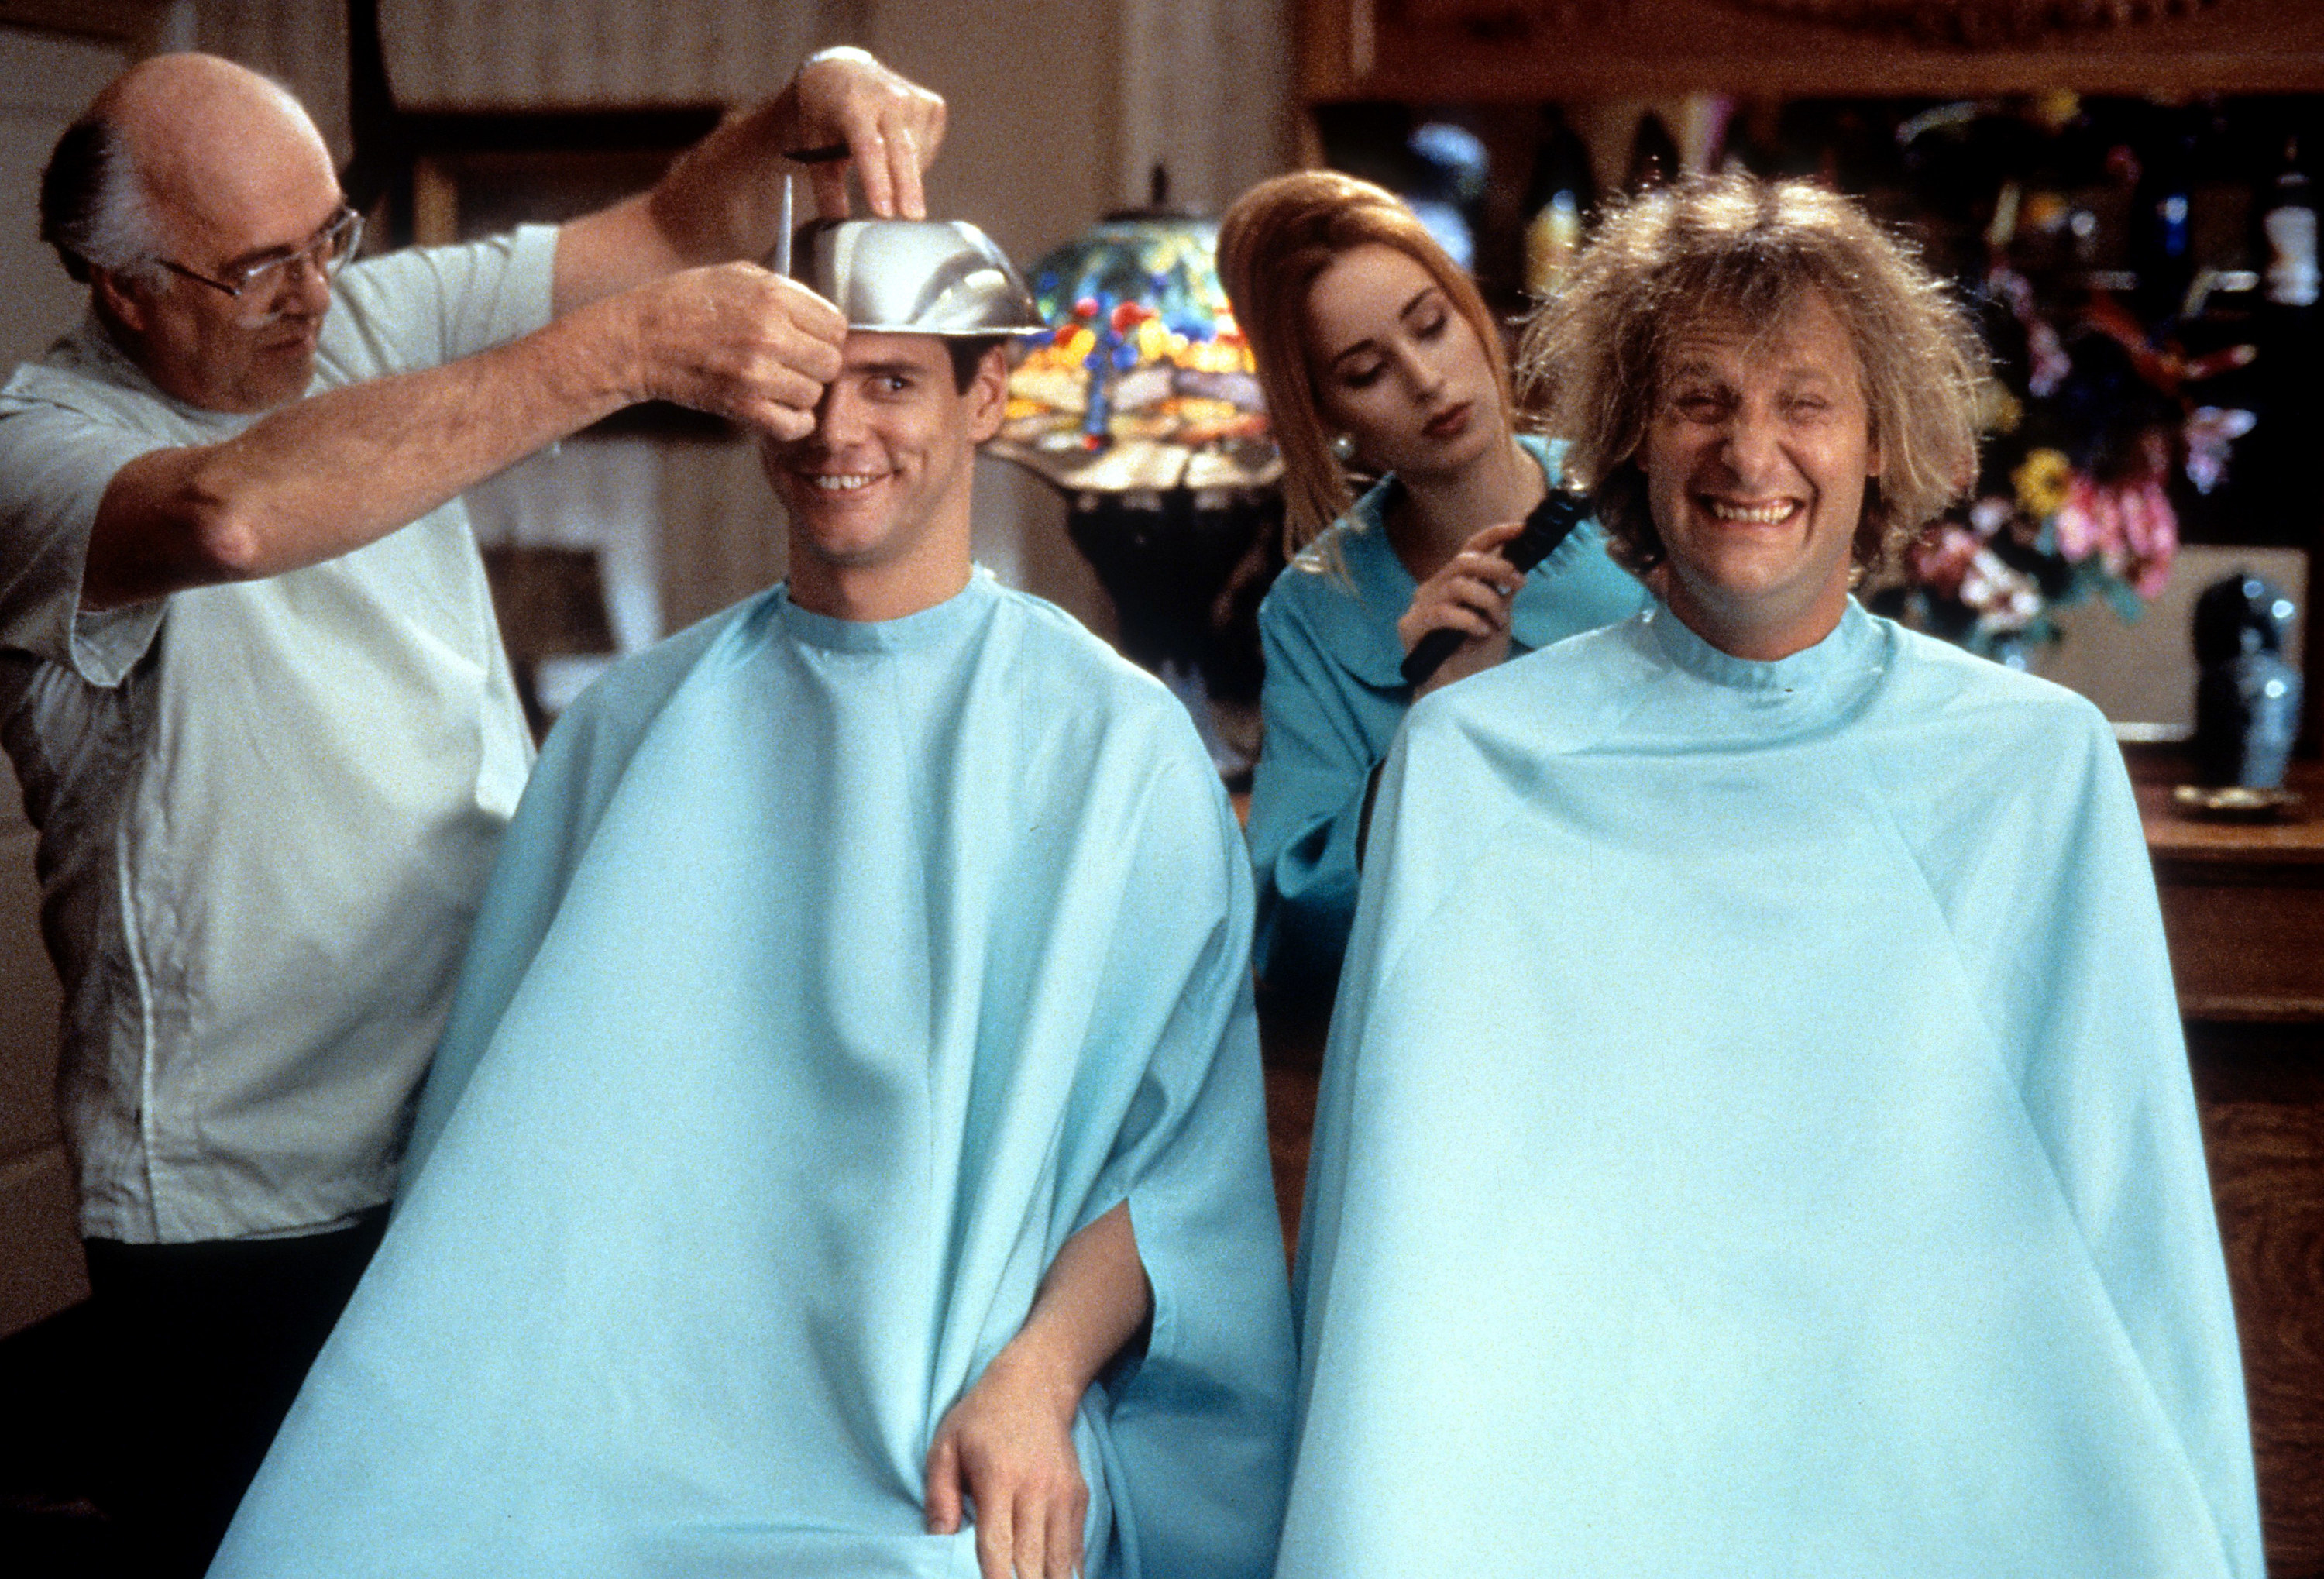 Jim Carrey and Jeff Daniels getting their hair cut in a scene from the film &#x27;Dumb &amp;amp; Dumber&#x27;